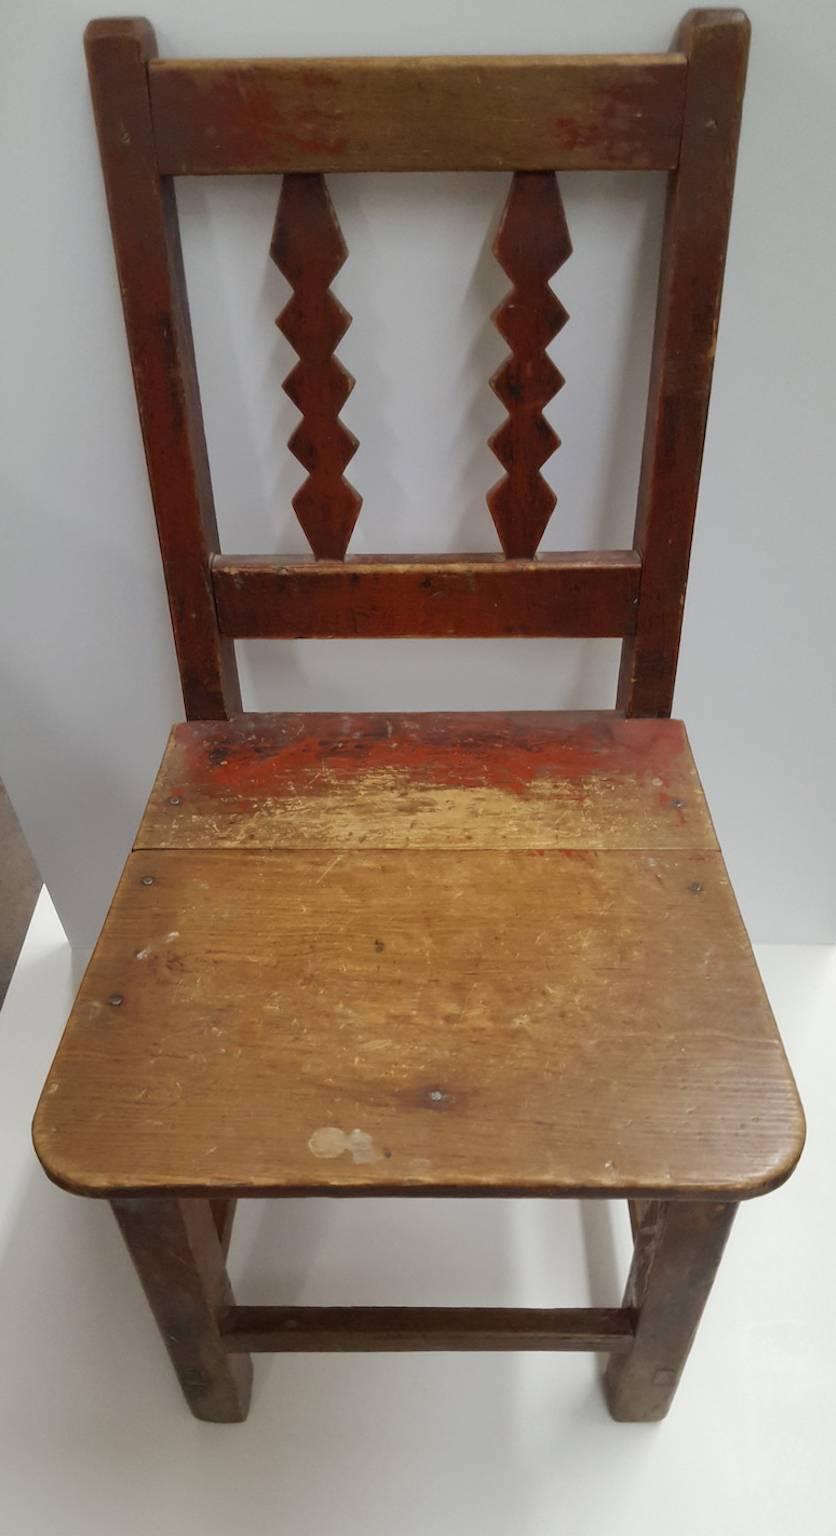 This is an unmatched pair of small, naive, Spanish flavored chairs. They could be used for seating, but may easily be considered folk objects to enjoy visually. Probably constructed in Mexico or New Mexico by local craftsman,
the chairs have a